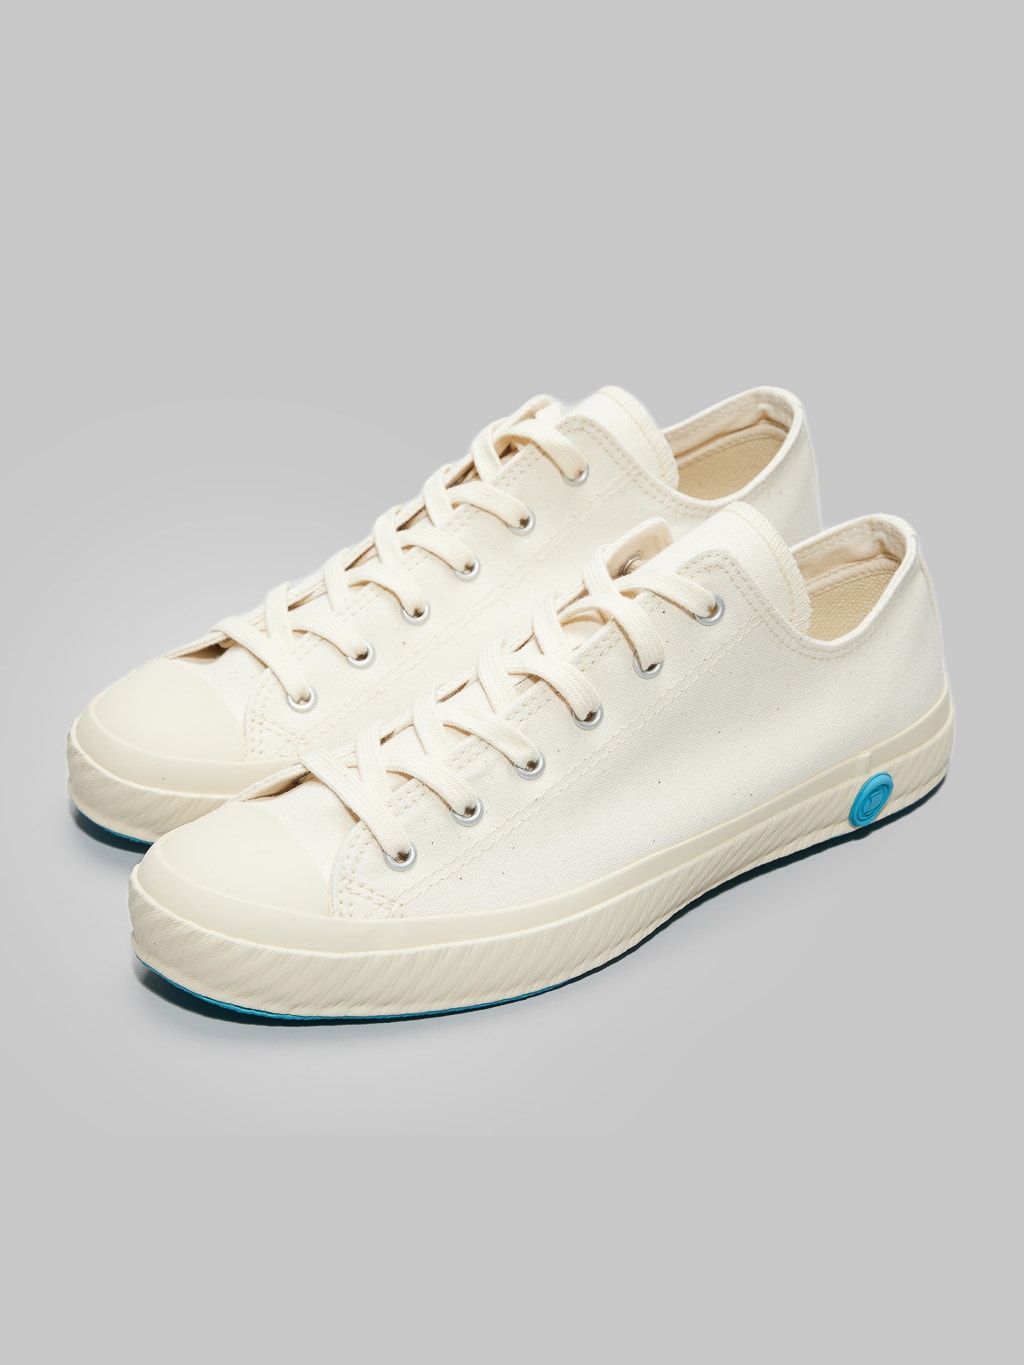 Shoes like pottery low white sneakers vulcanized sole